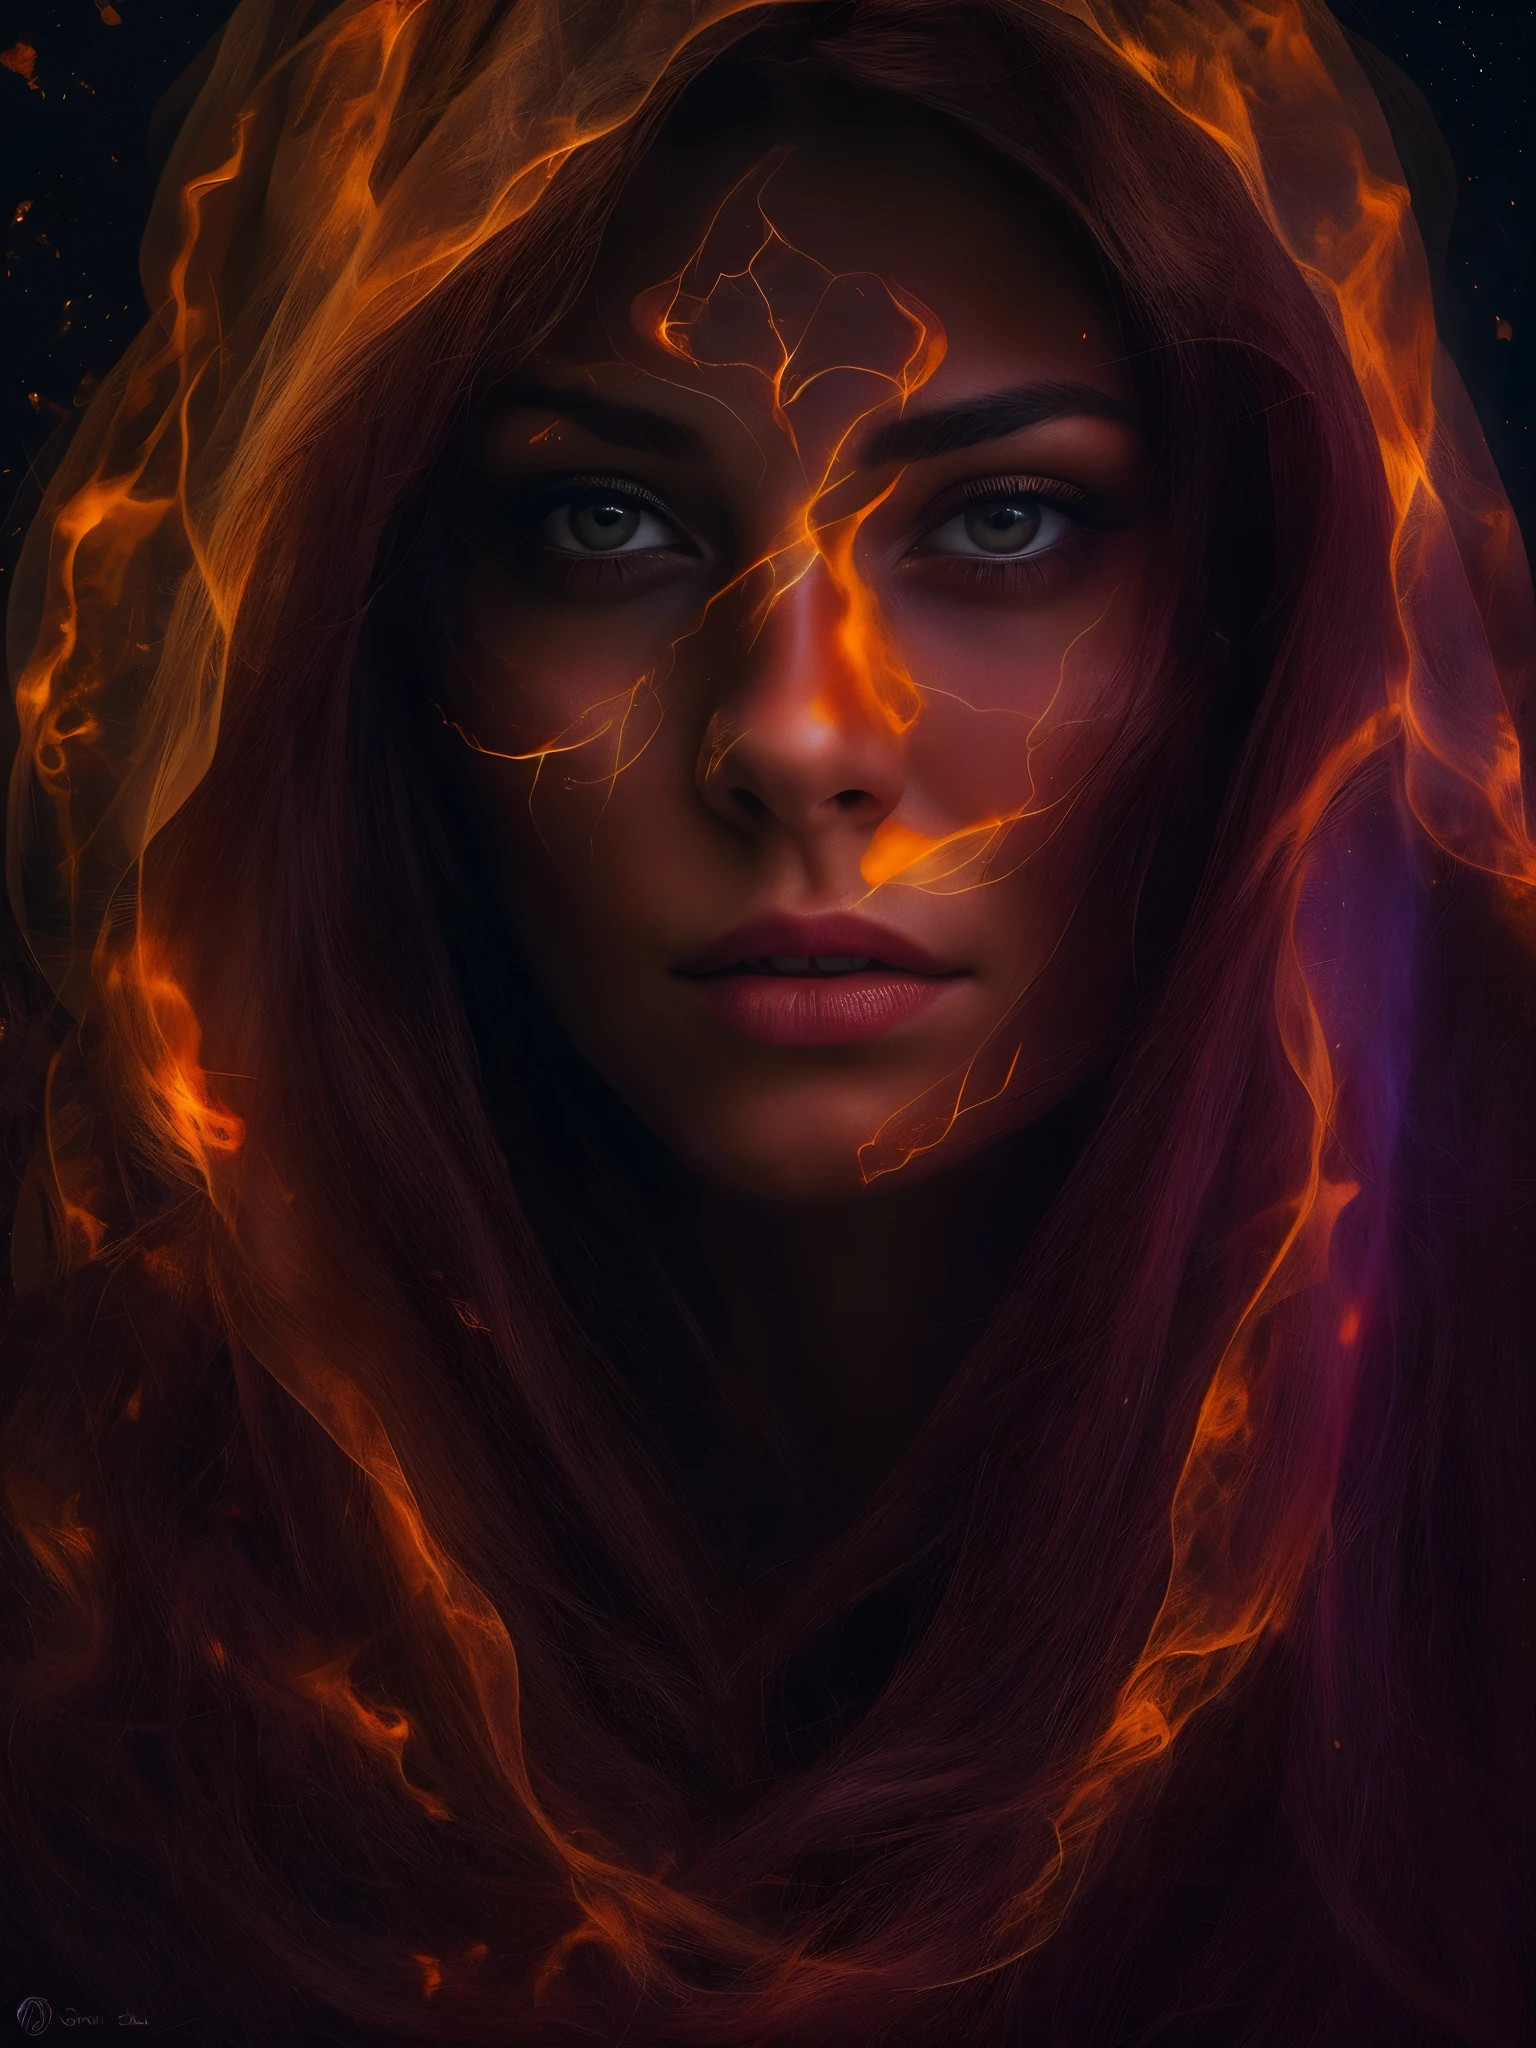 Image of a woman's face half veiled in shadow, half illuminated by a fiery orange glow, symbolizing the internal struggle between light and darkness, love and evil, within the human soul. super dark and gory, UHD, best quality, 16k, anatomically correct, textured skin, super detail